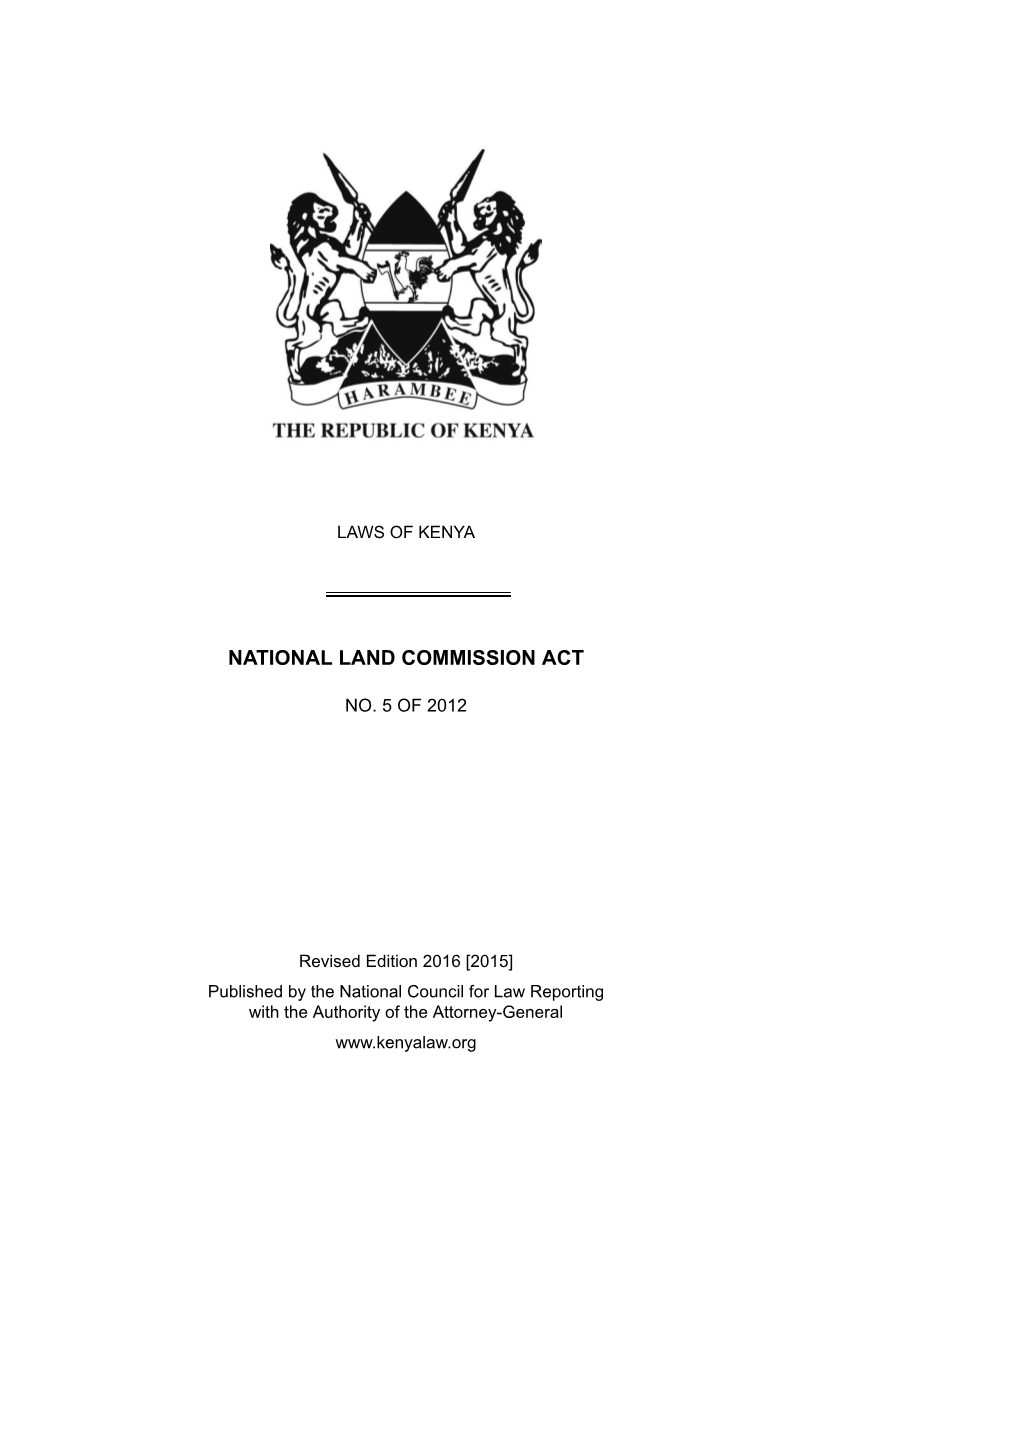 National Land Commission Act 2012